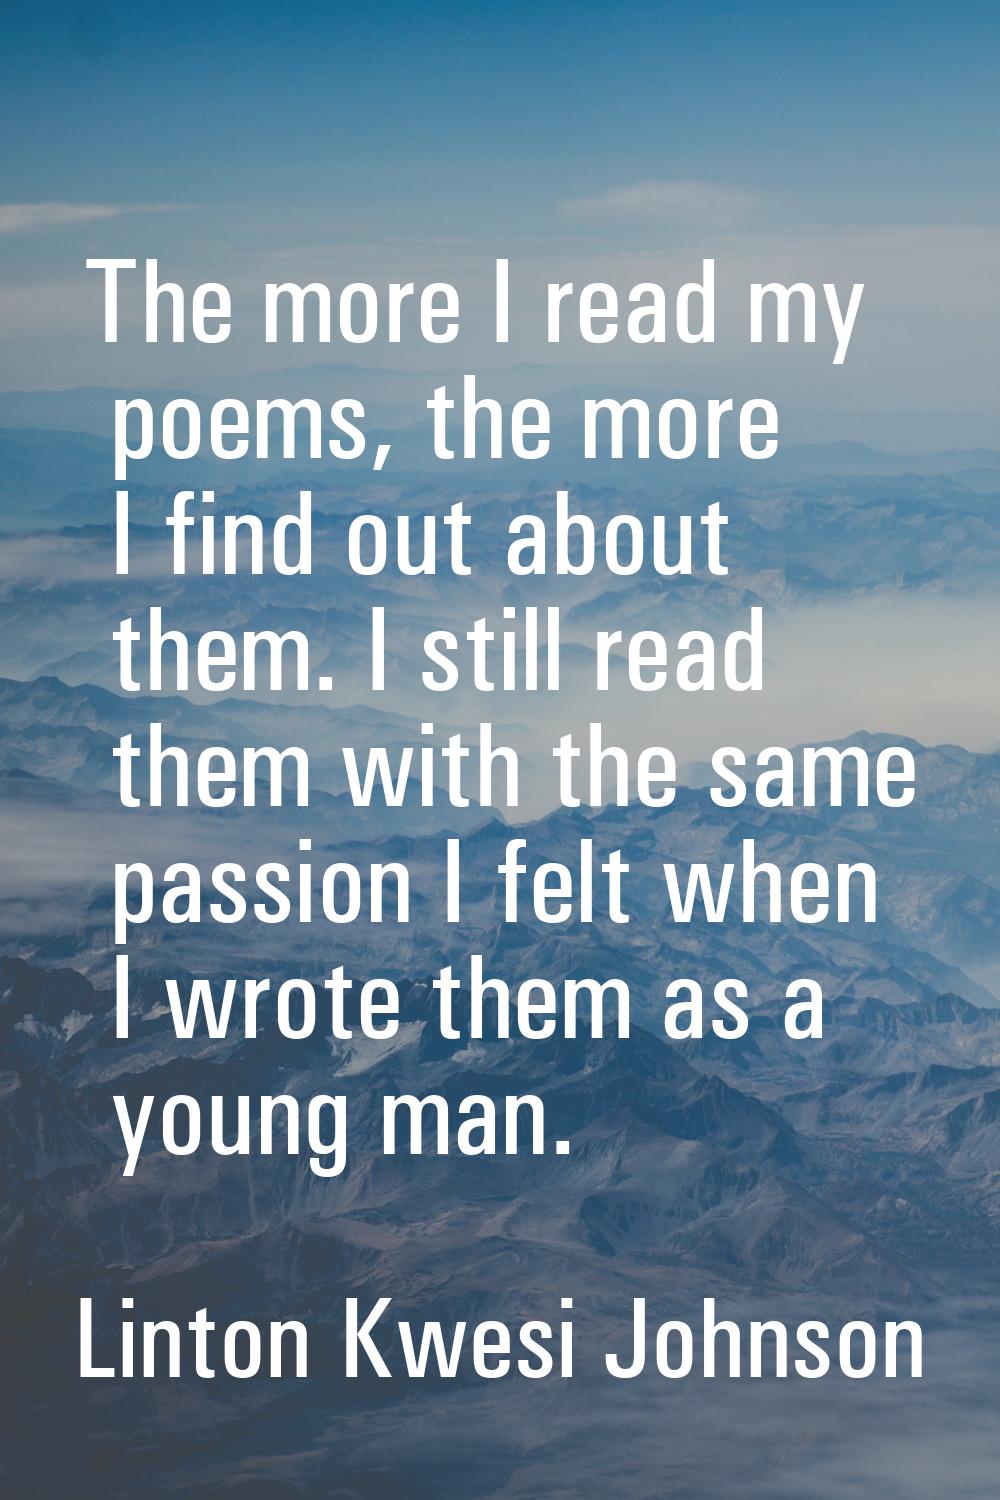 The more I read my poems, the more I find out about them. I still read them with the same passion I